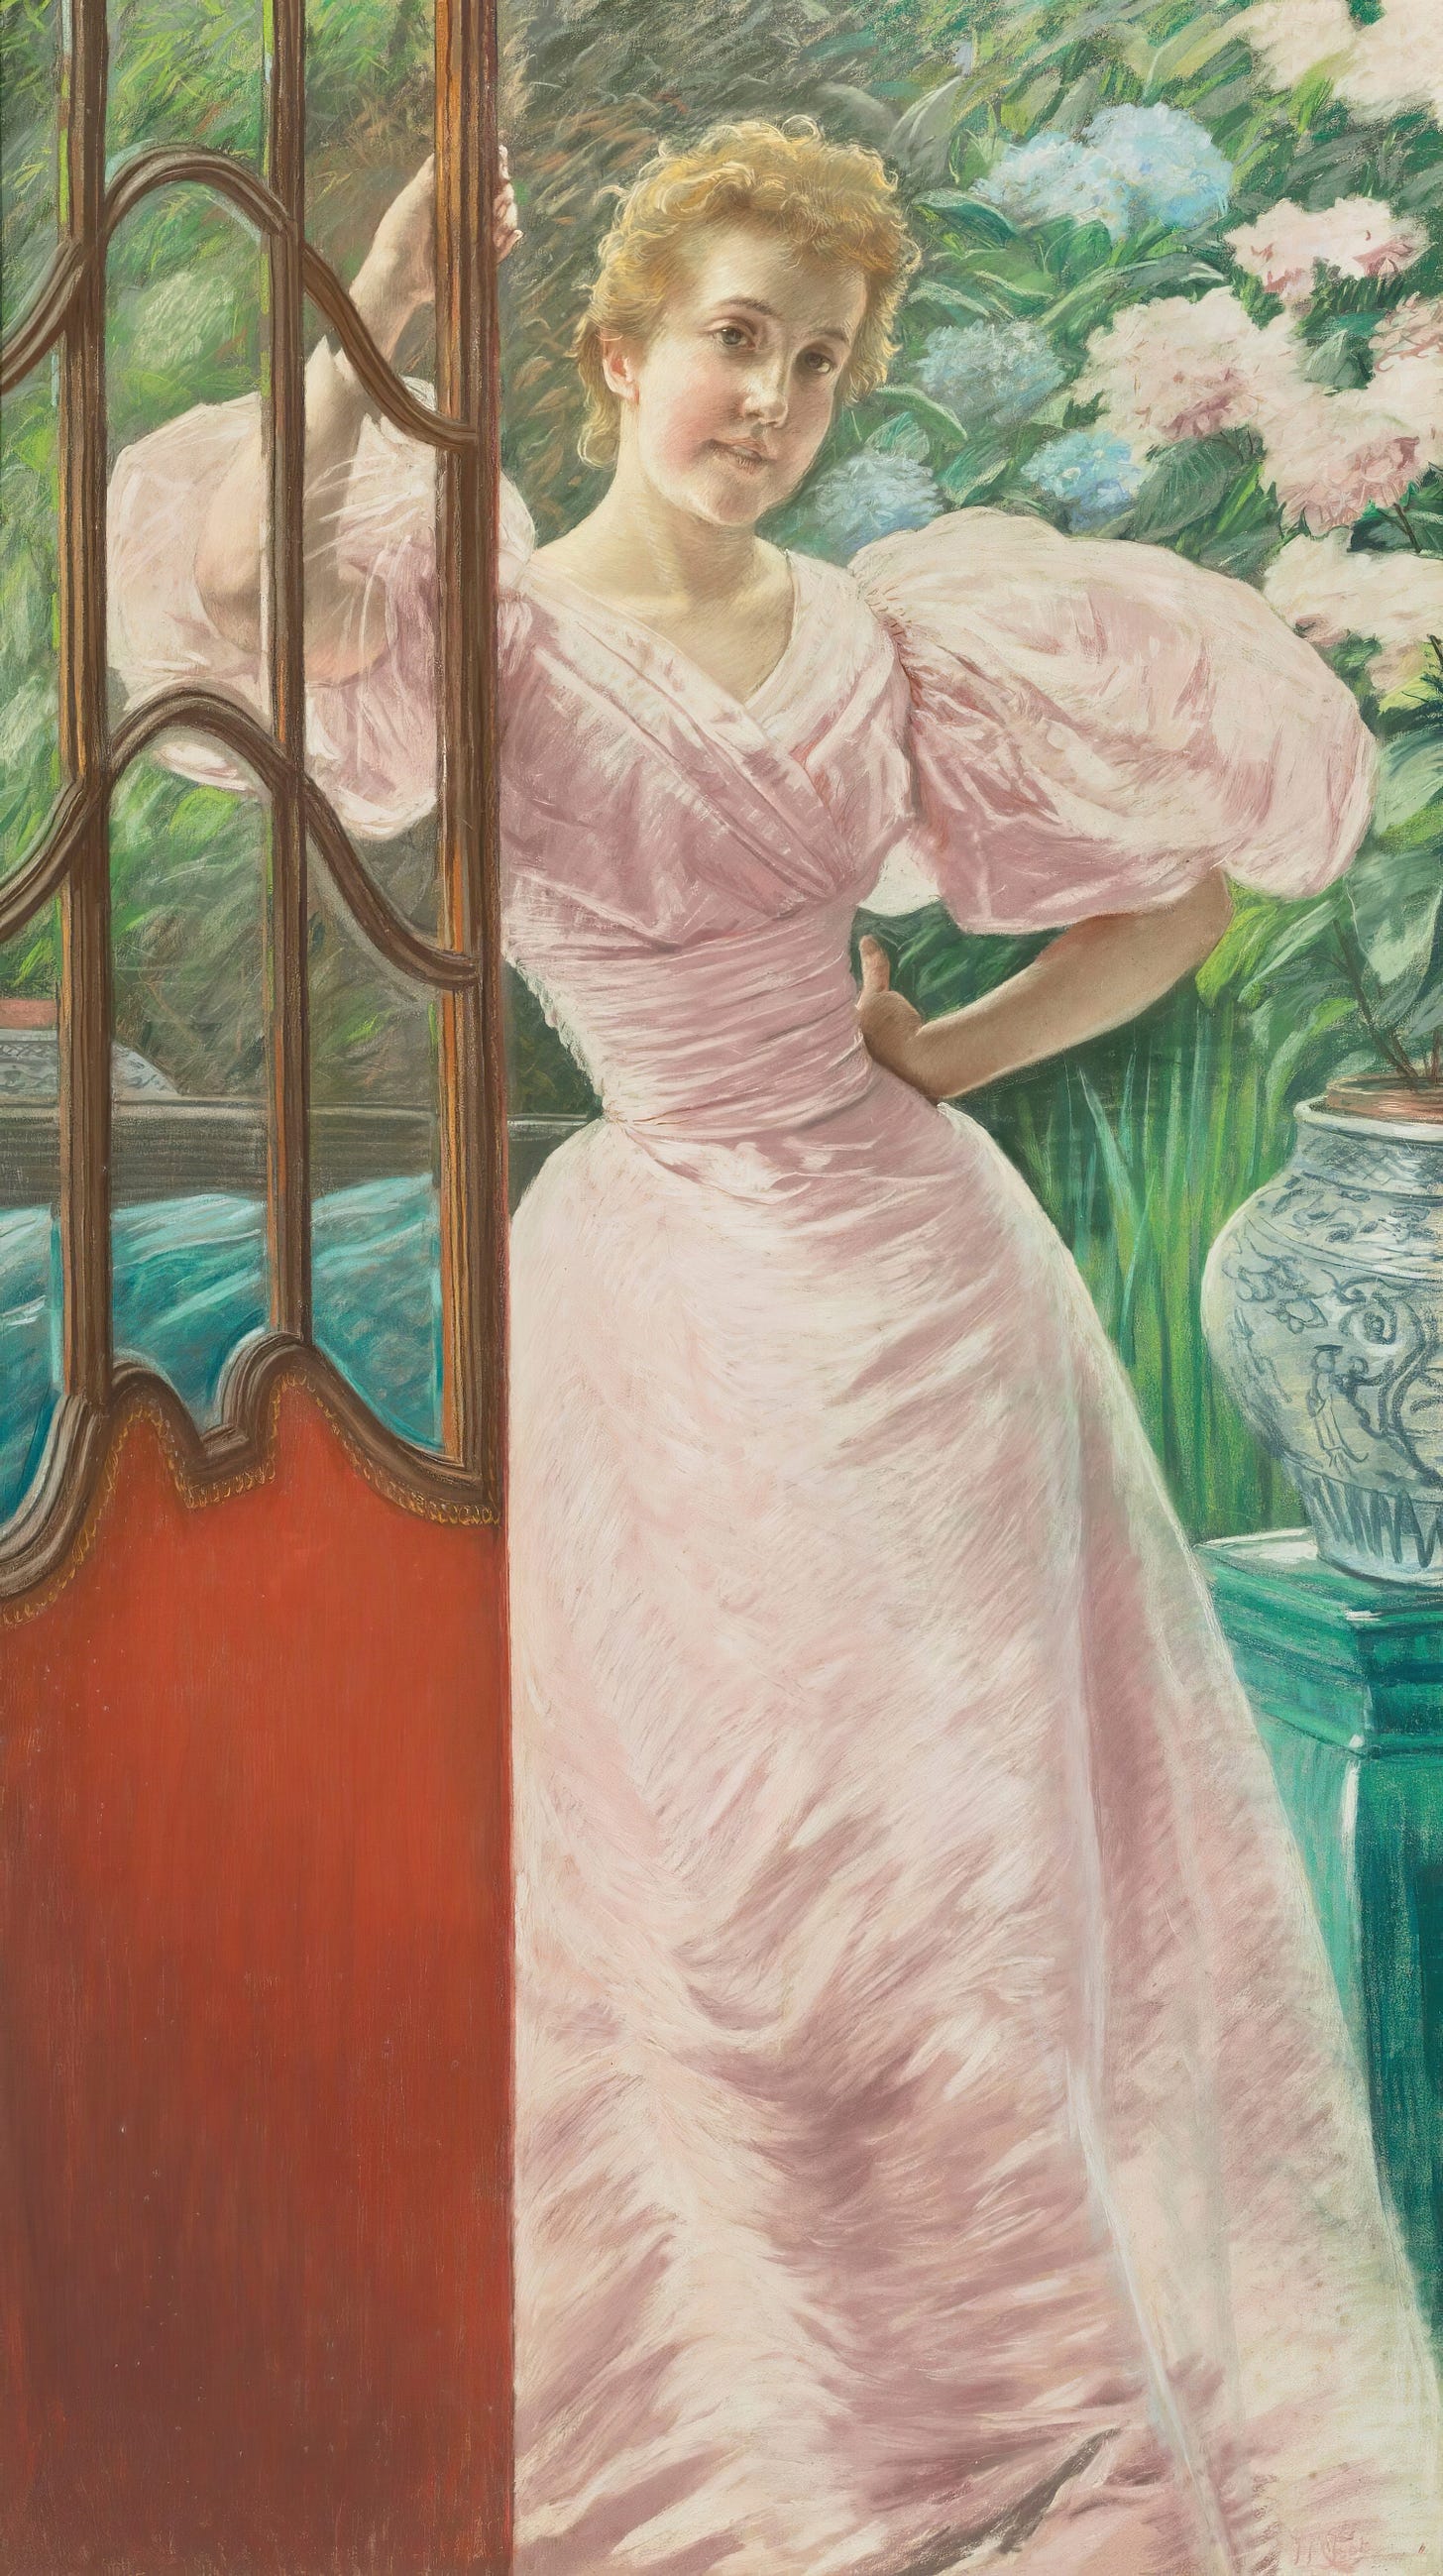 Portrait Of A Young Woman In A Conservatory (1895) by James Tissot